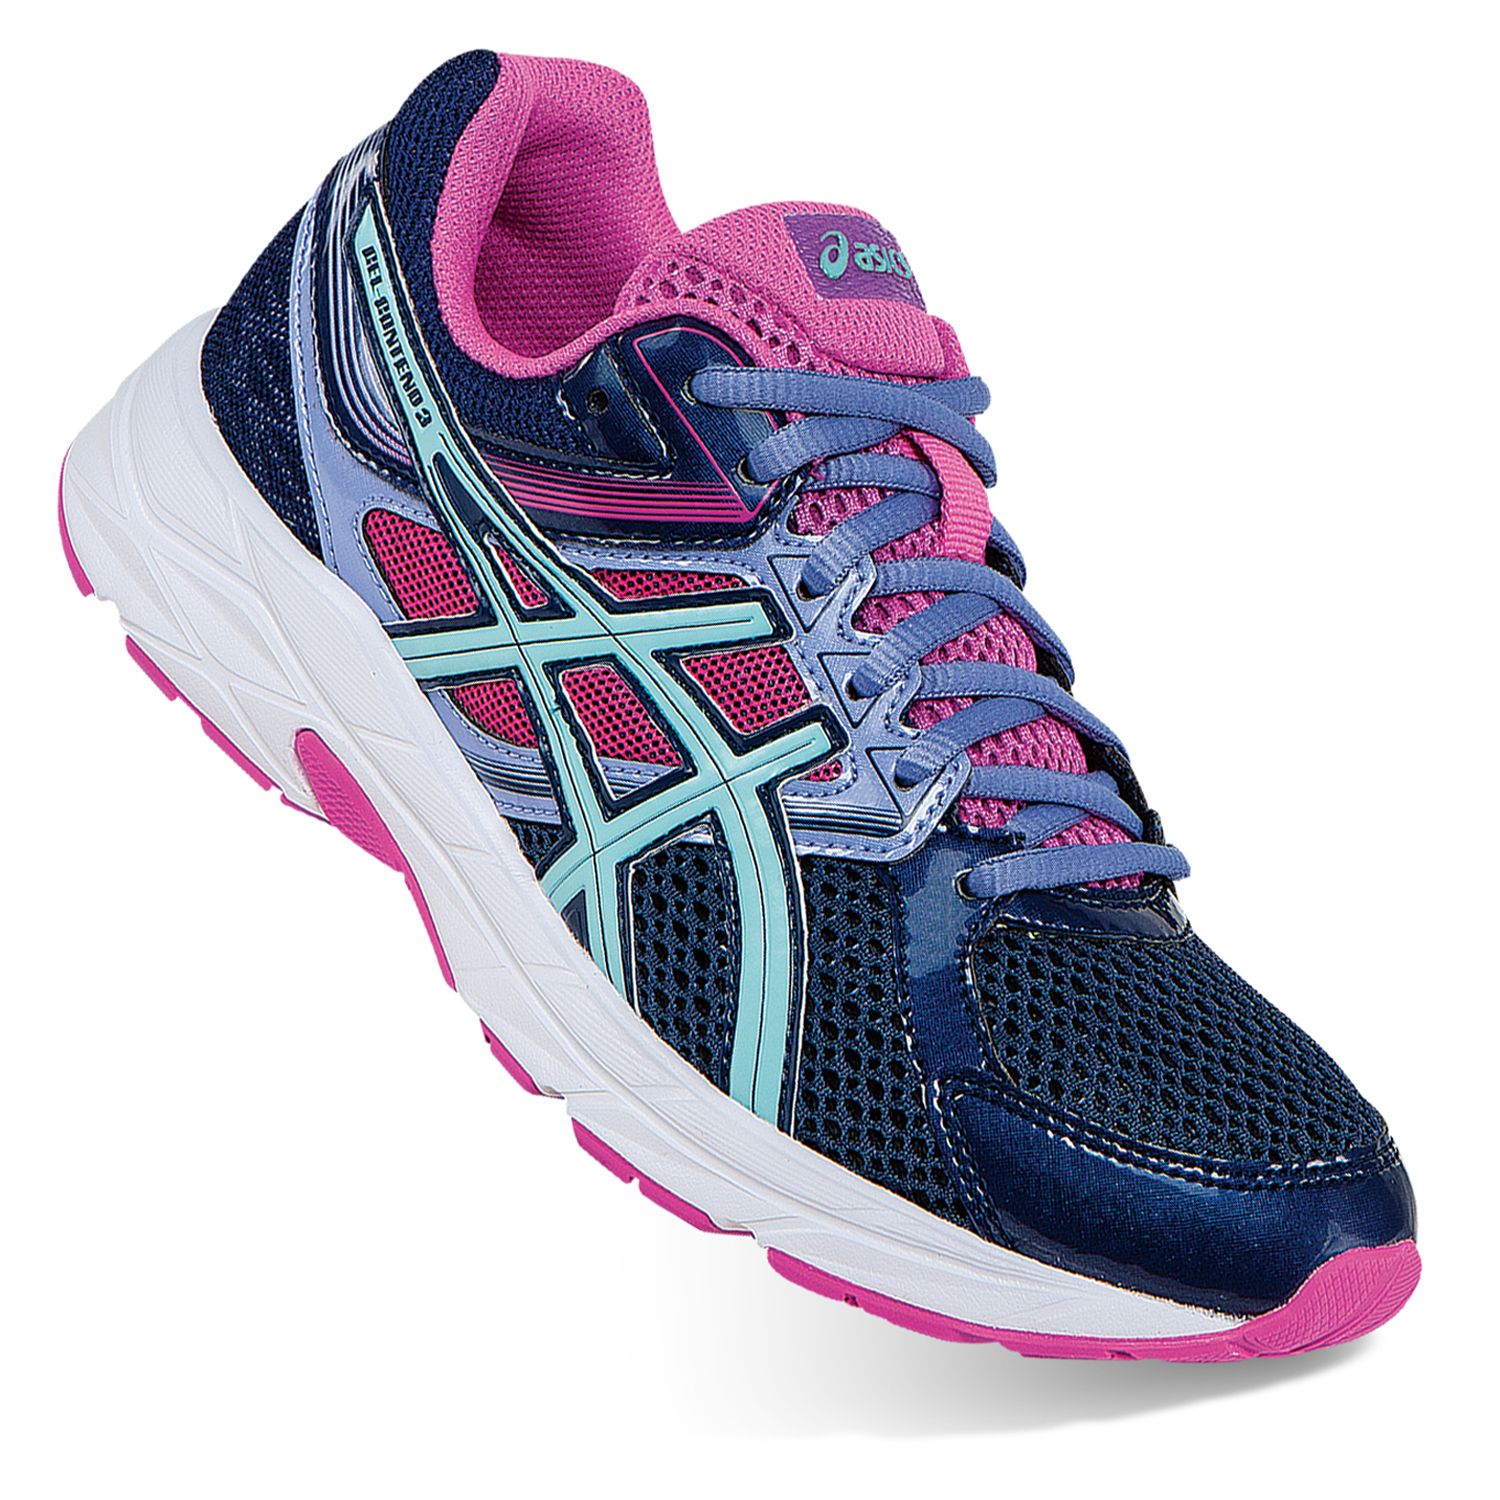 asics gel contend 3 review